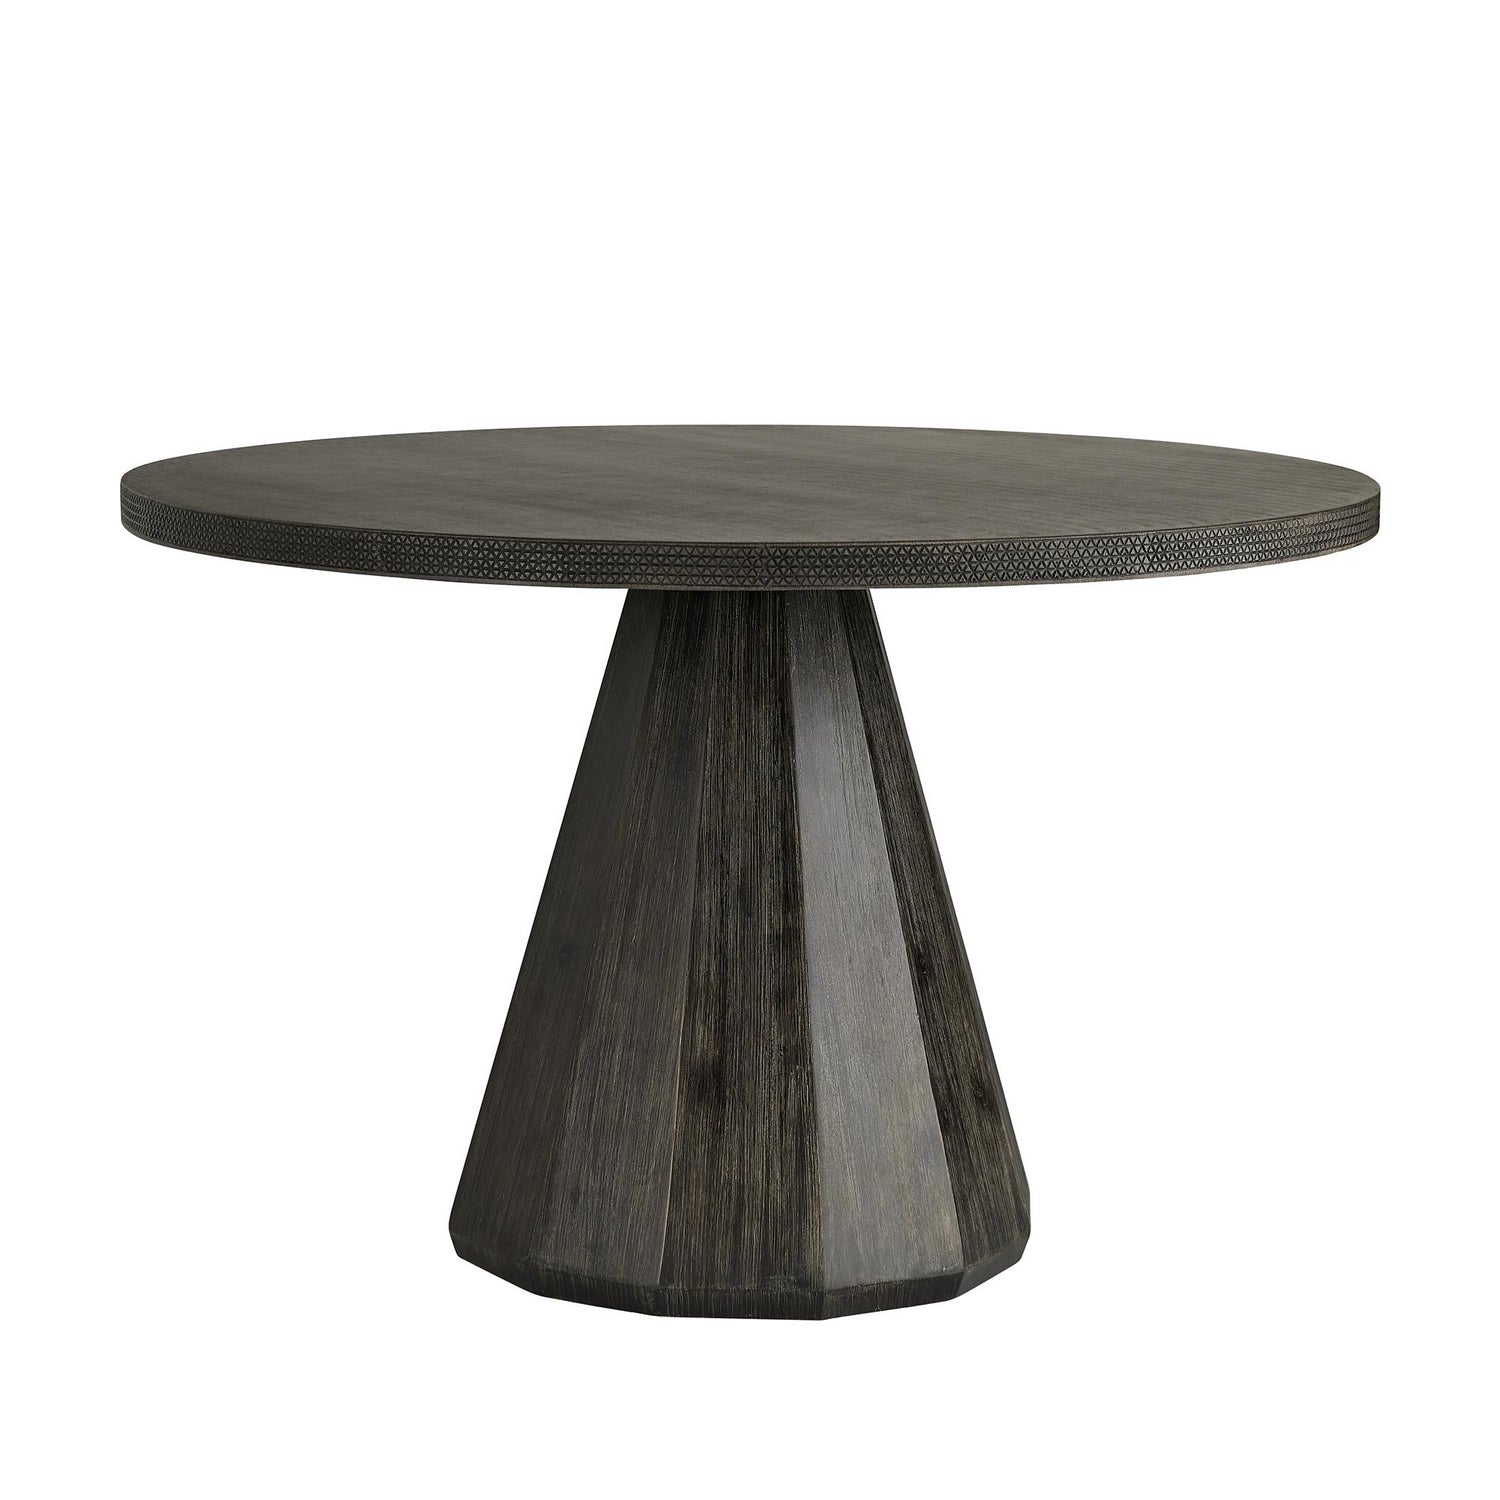 Dining Table from the Seren collection in Dark Ash finish